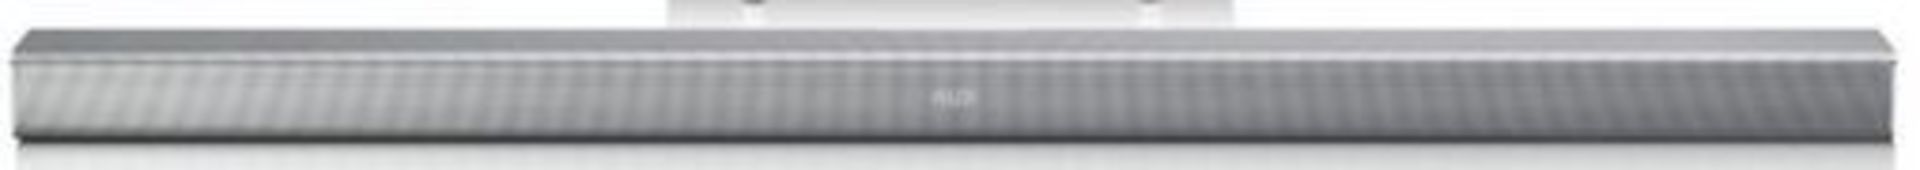 1 SAMSUNG HW-H551 SOUND BAR (PUBLIC VIEWING AVAILABLE)